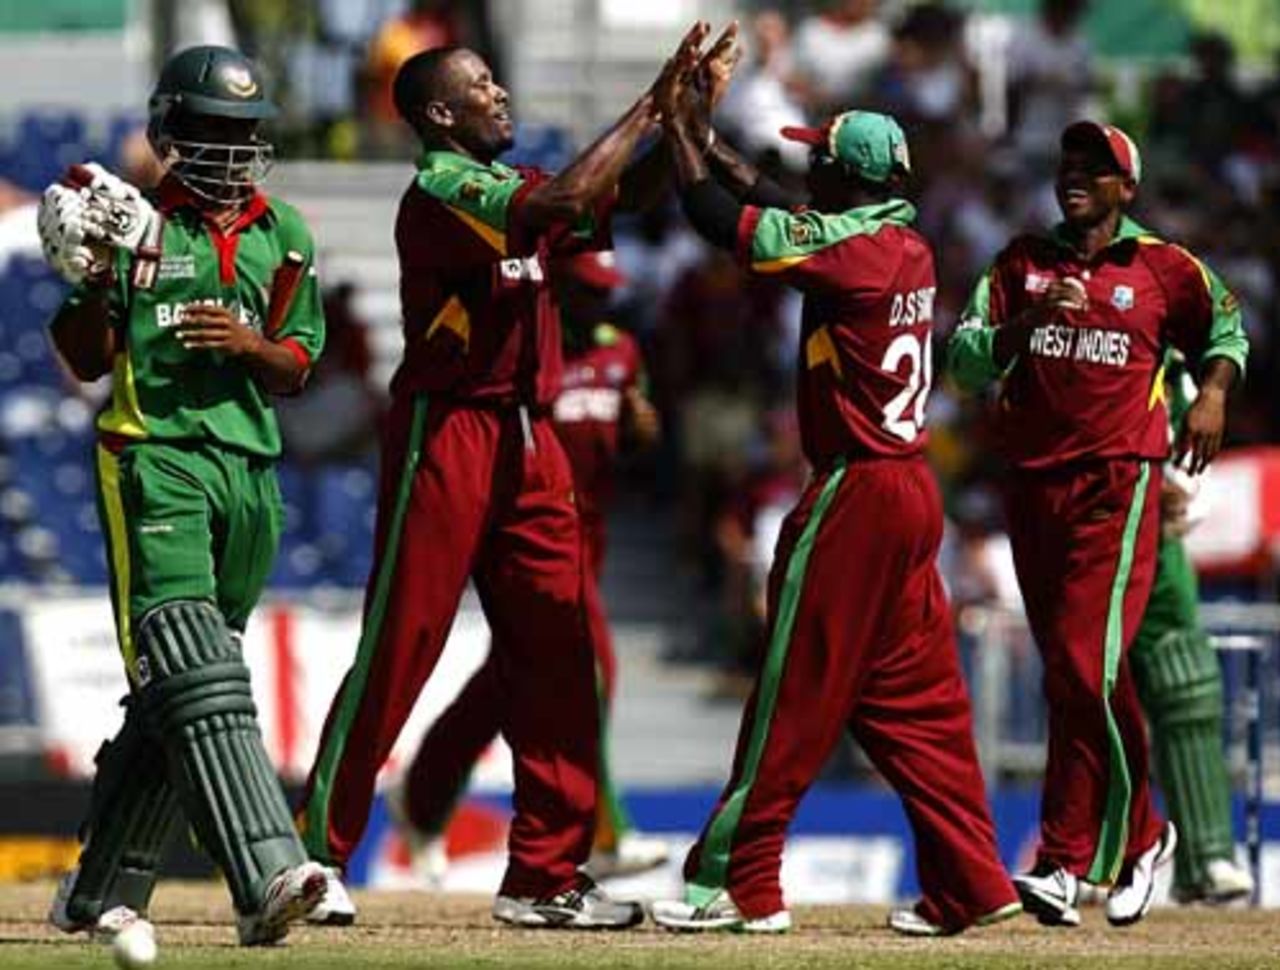 West Indies players celebrate Corey Collymore's dismissal of Saqibul Hassan, West Indies v Bangladesh, Super Eights, Barbados, April 19, 2007